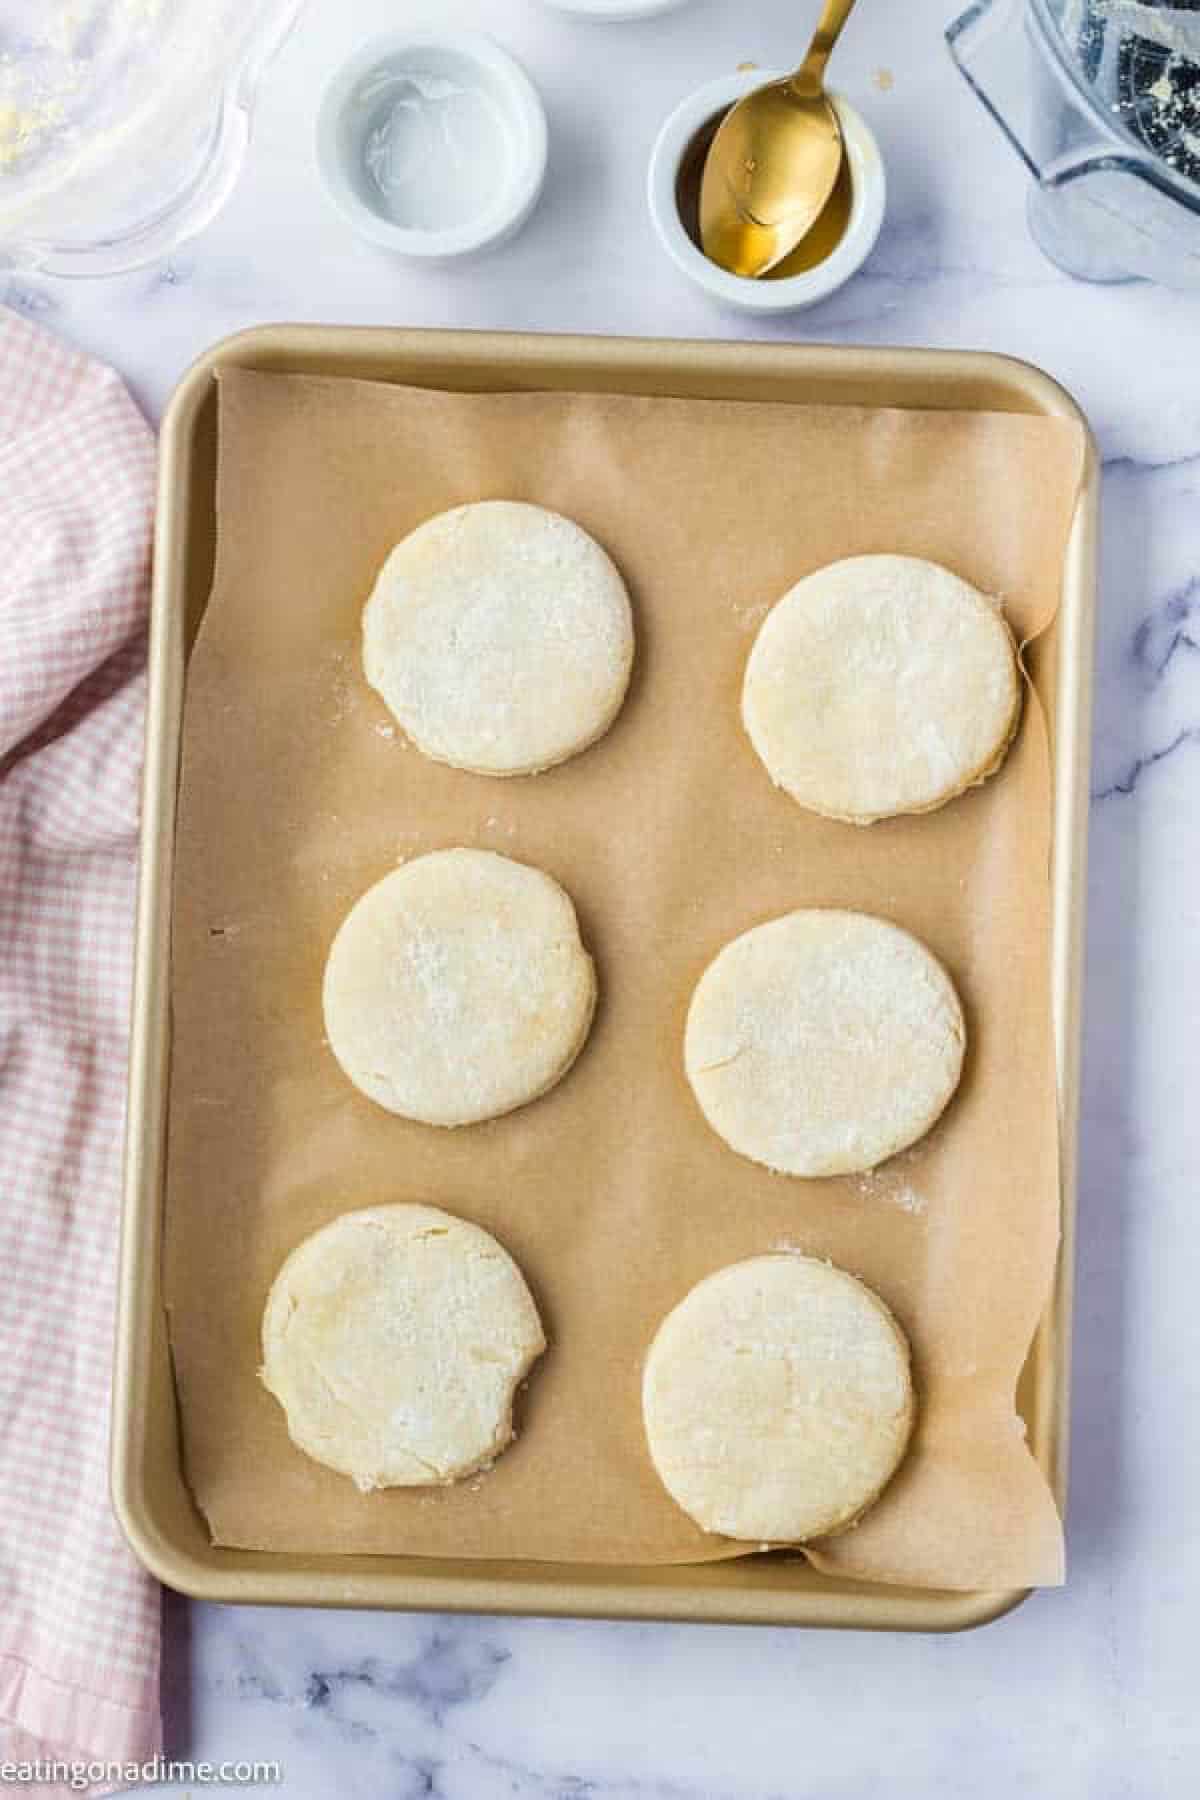 Biscuit dough on a baking sheet lined with parchment paper